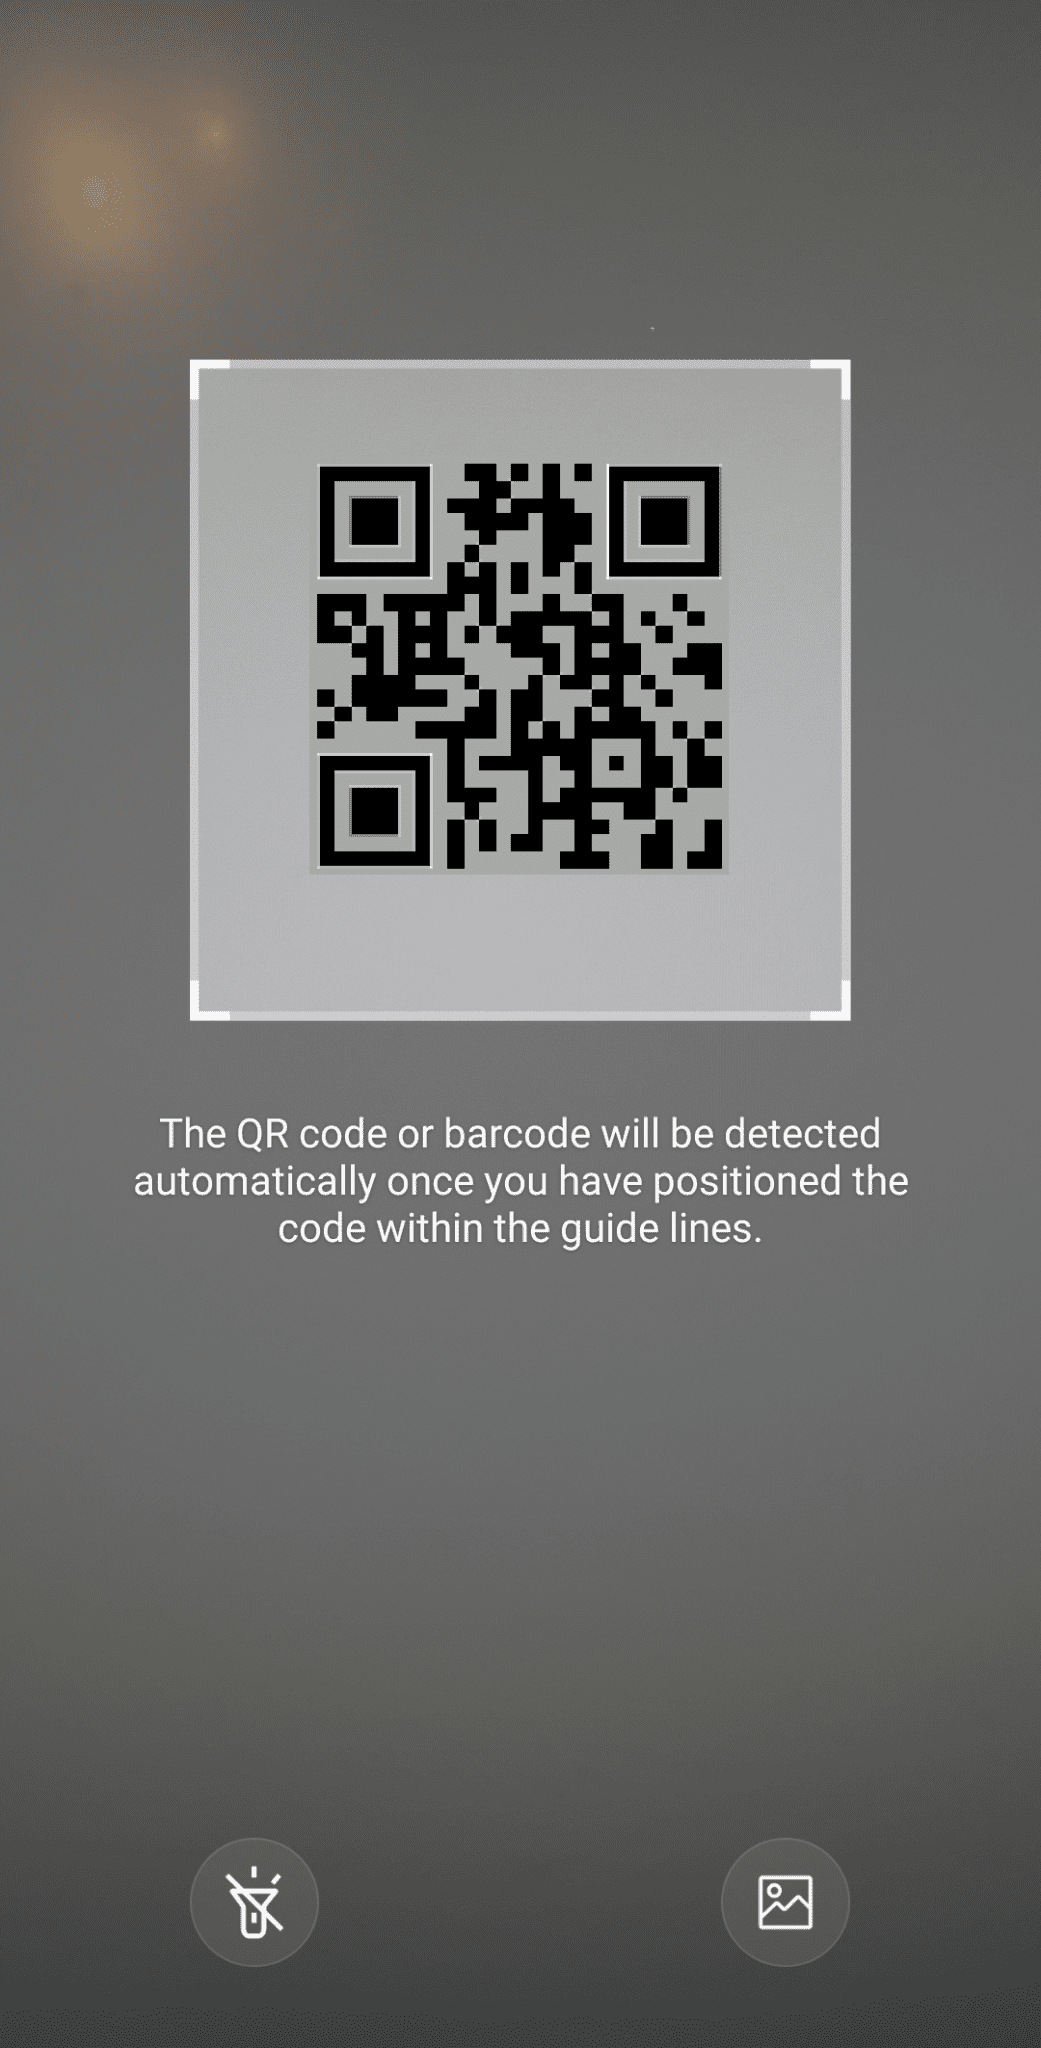 Samsung Android Browser: Enable the QR Code Scanner - Technipages